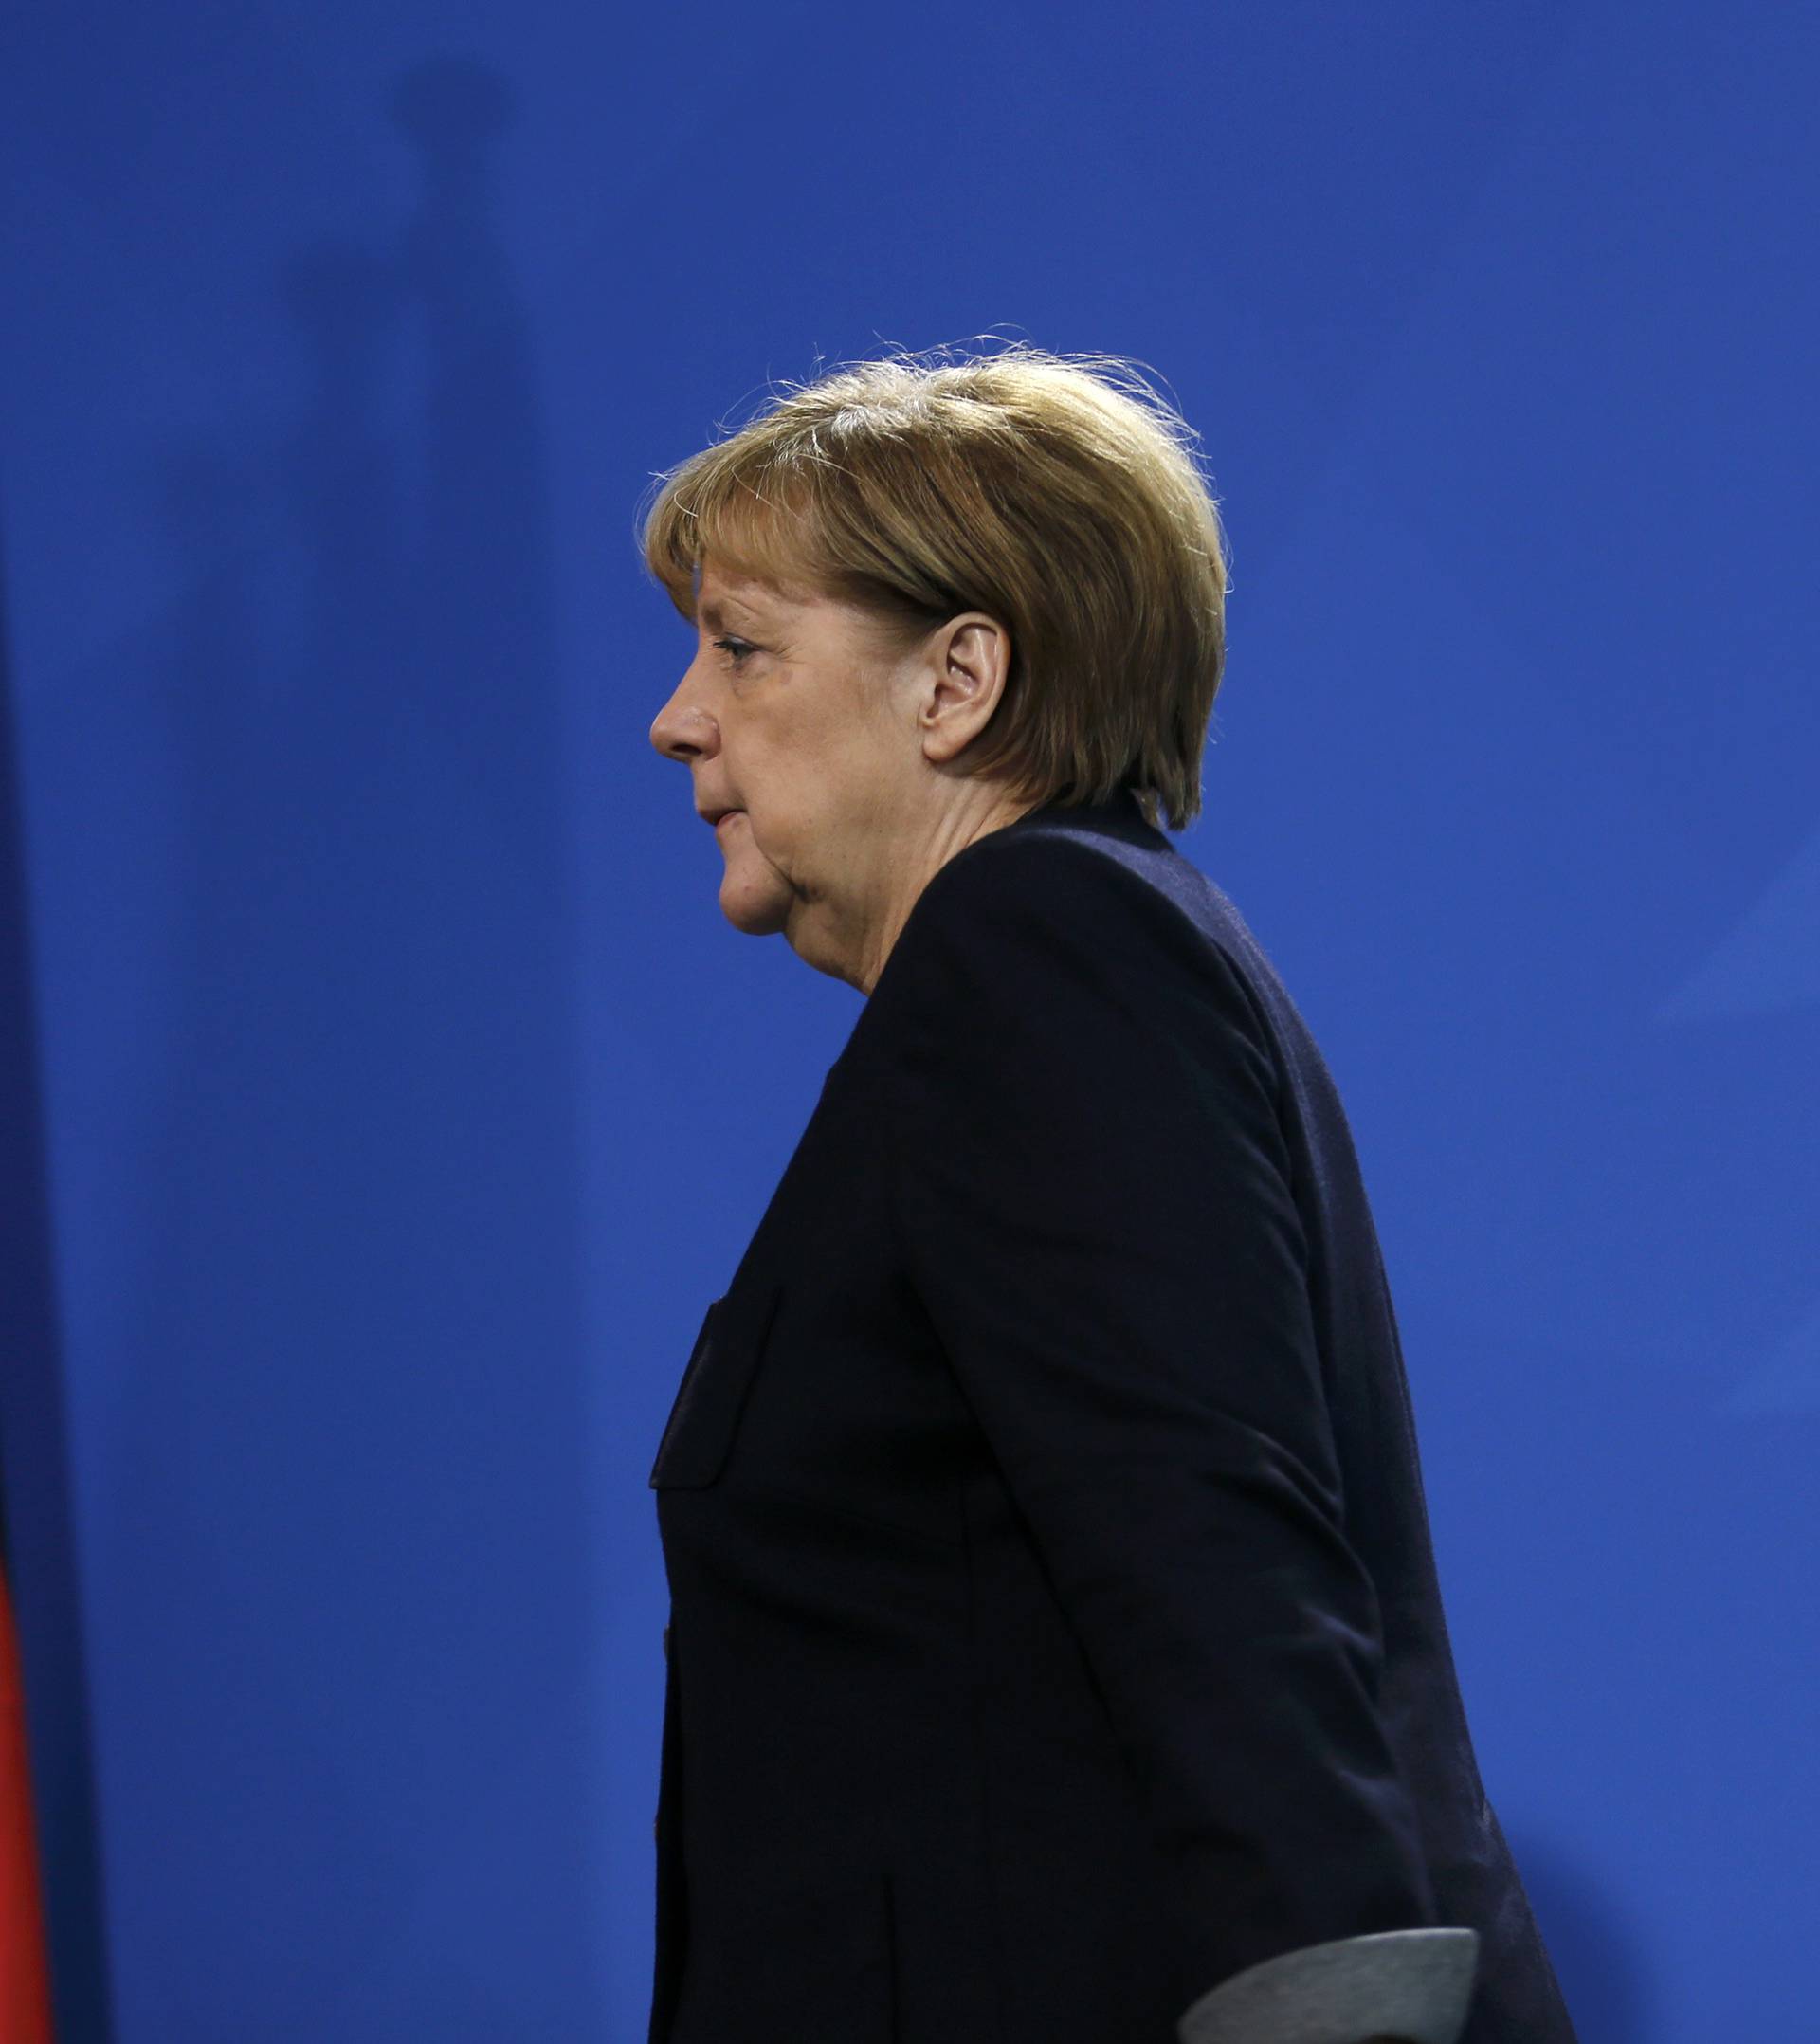 German Chancellor Angela Merkel leaves a news conference in Berlin